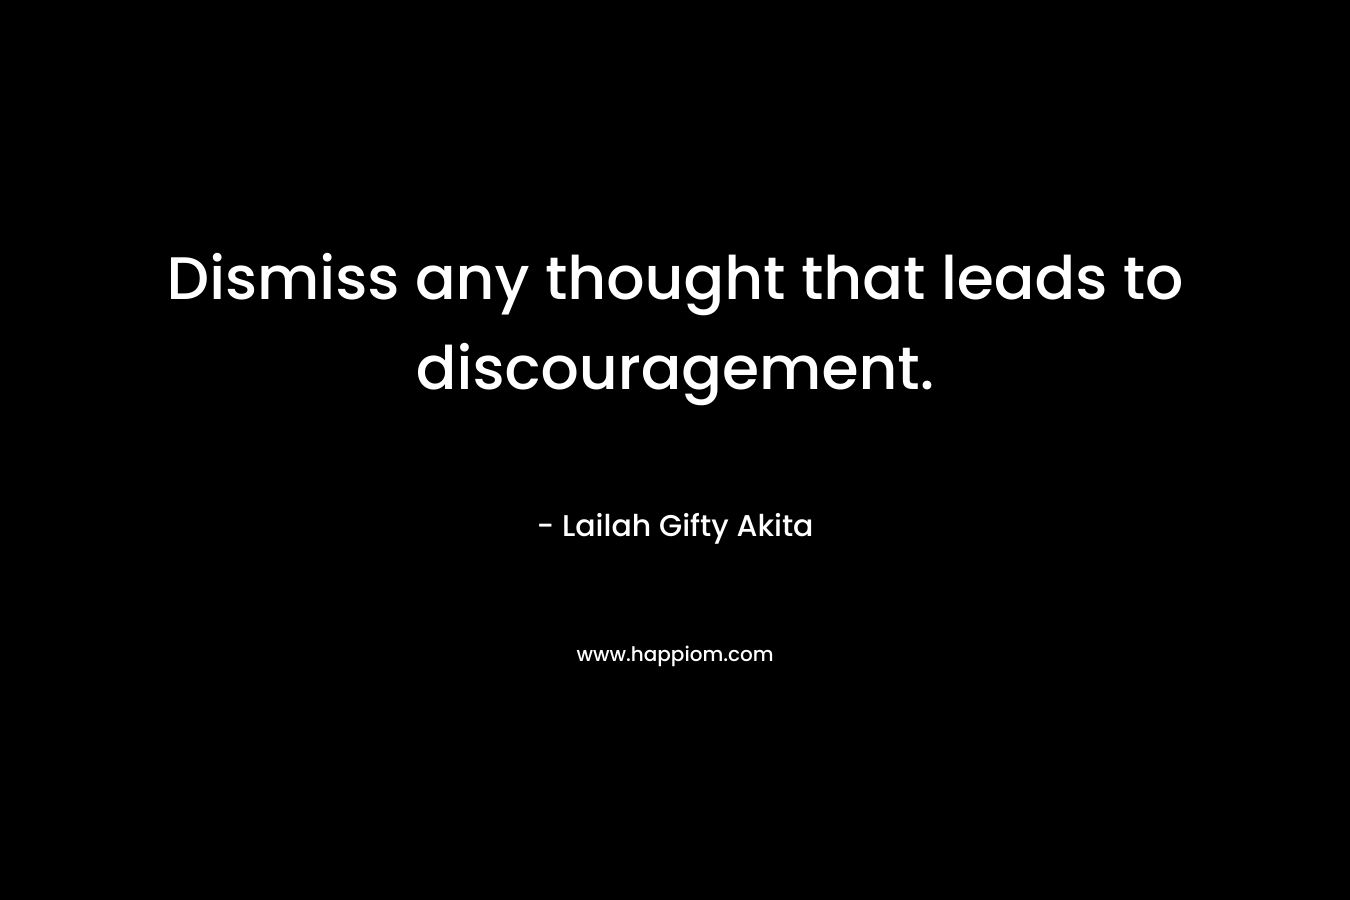 Dismiss any thought that leads to discouragement. – Lailah Gifty Akita